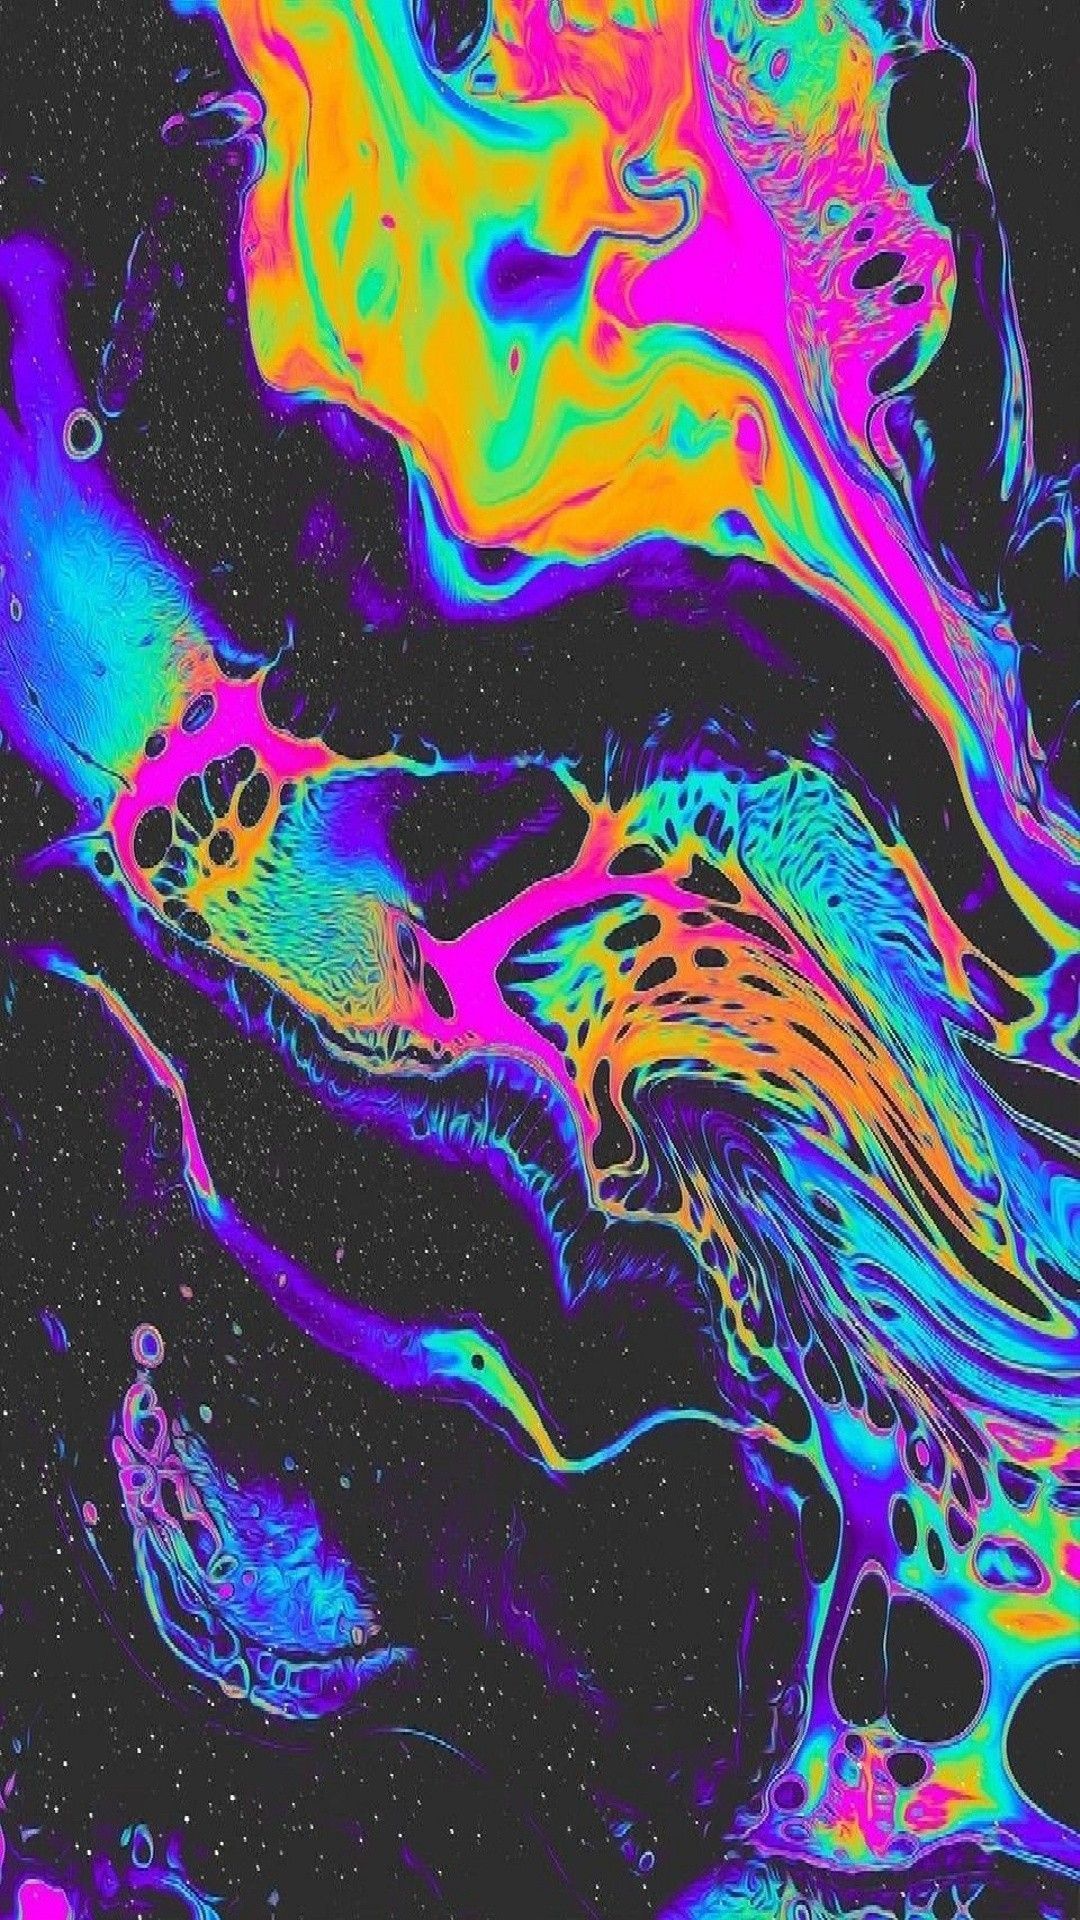 Free download Abstract iPhone wallpapers in 2020 Trippy wallpapers